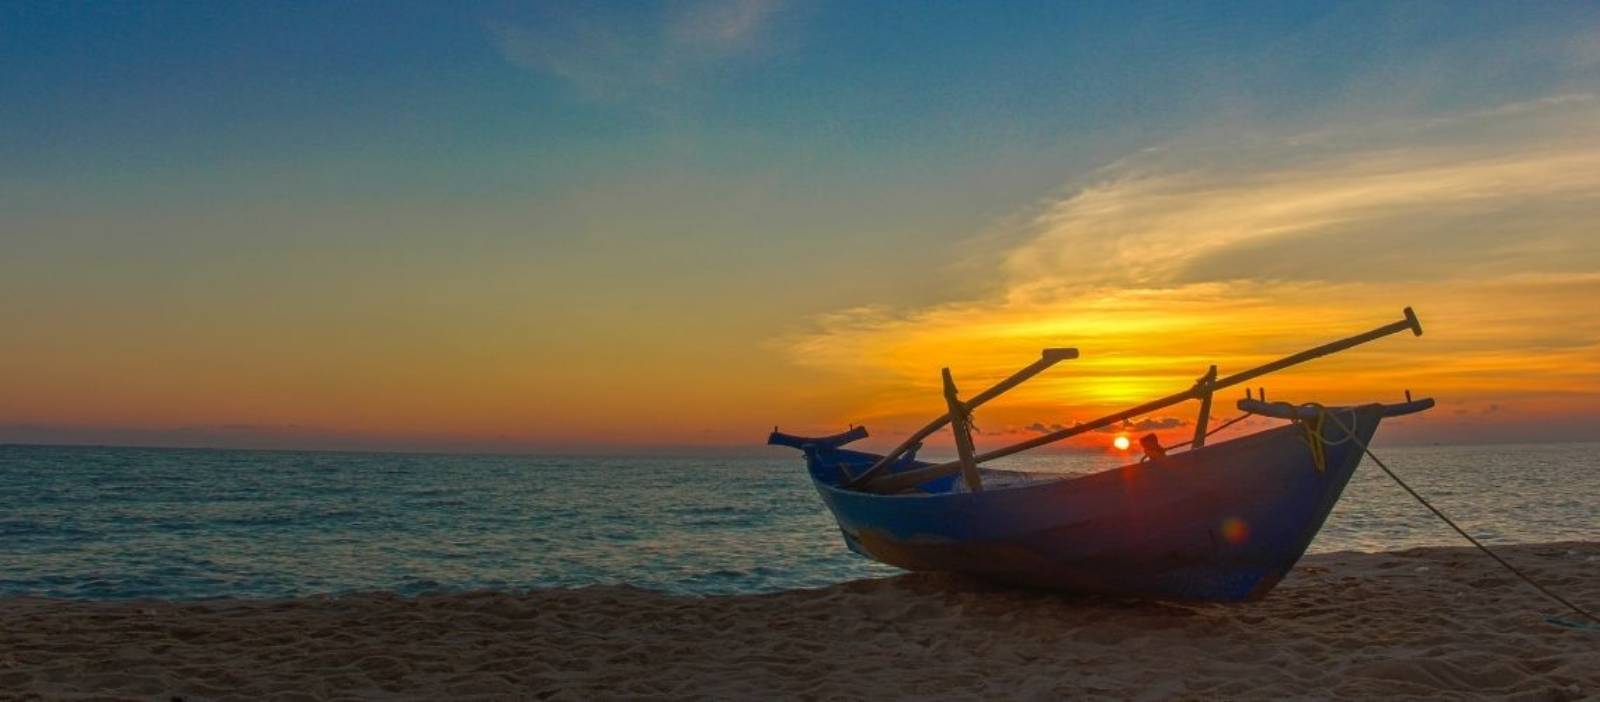 Top 10 Things To Do In Phu Quoc Island